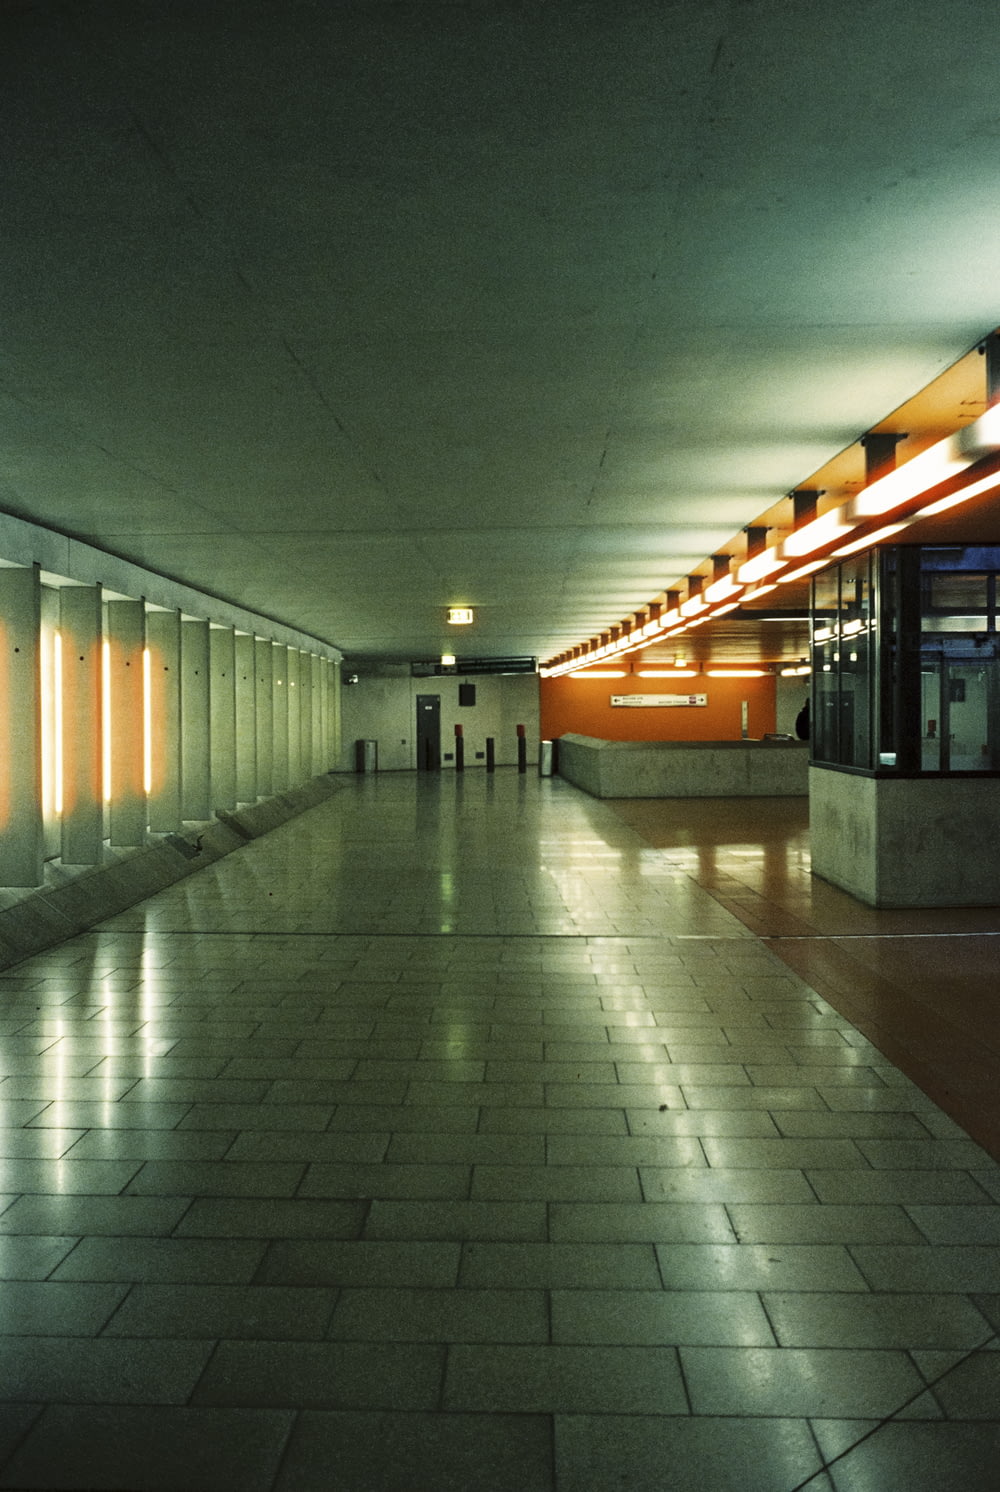 a long hallway with a tiled floor and orange walls